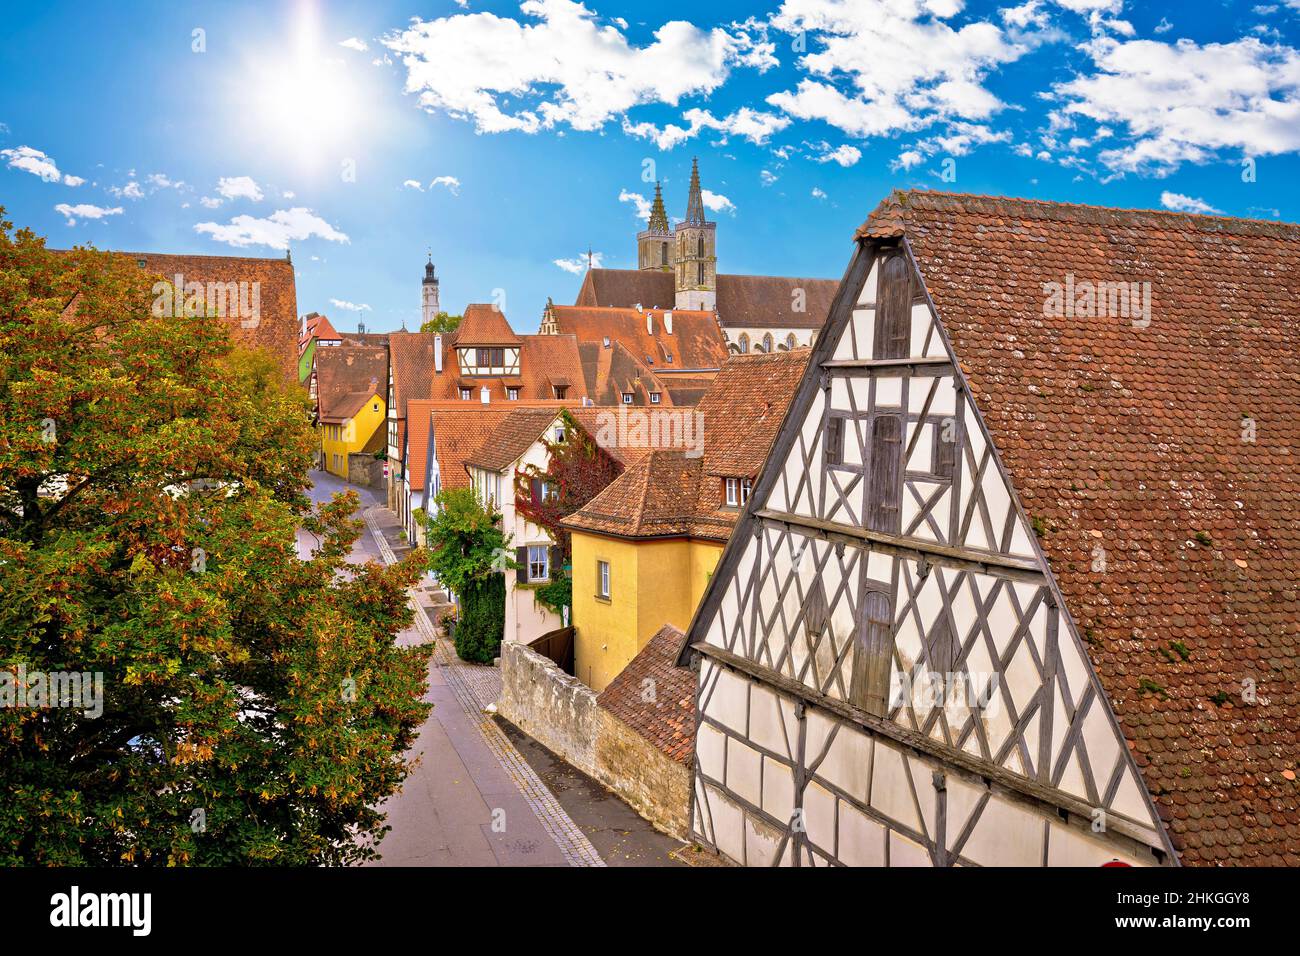 Rooftops and landmarks of historic town of Rothenburg ob der Tauber, Romantic road of Bavaria region of Germany Stock Photo